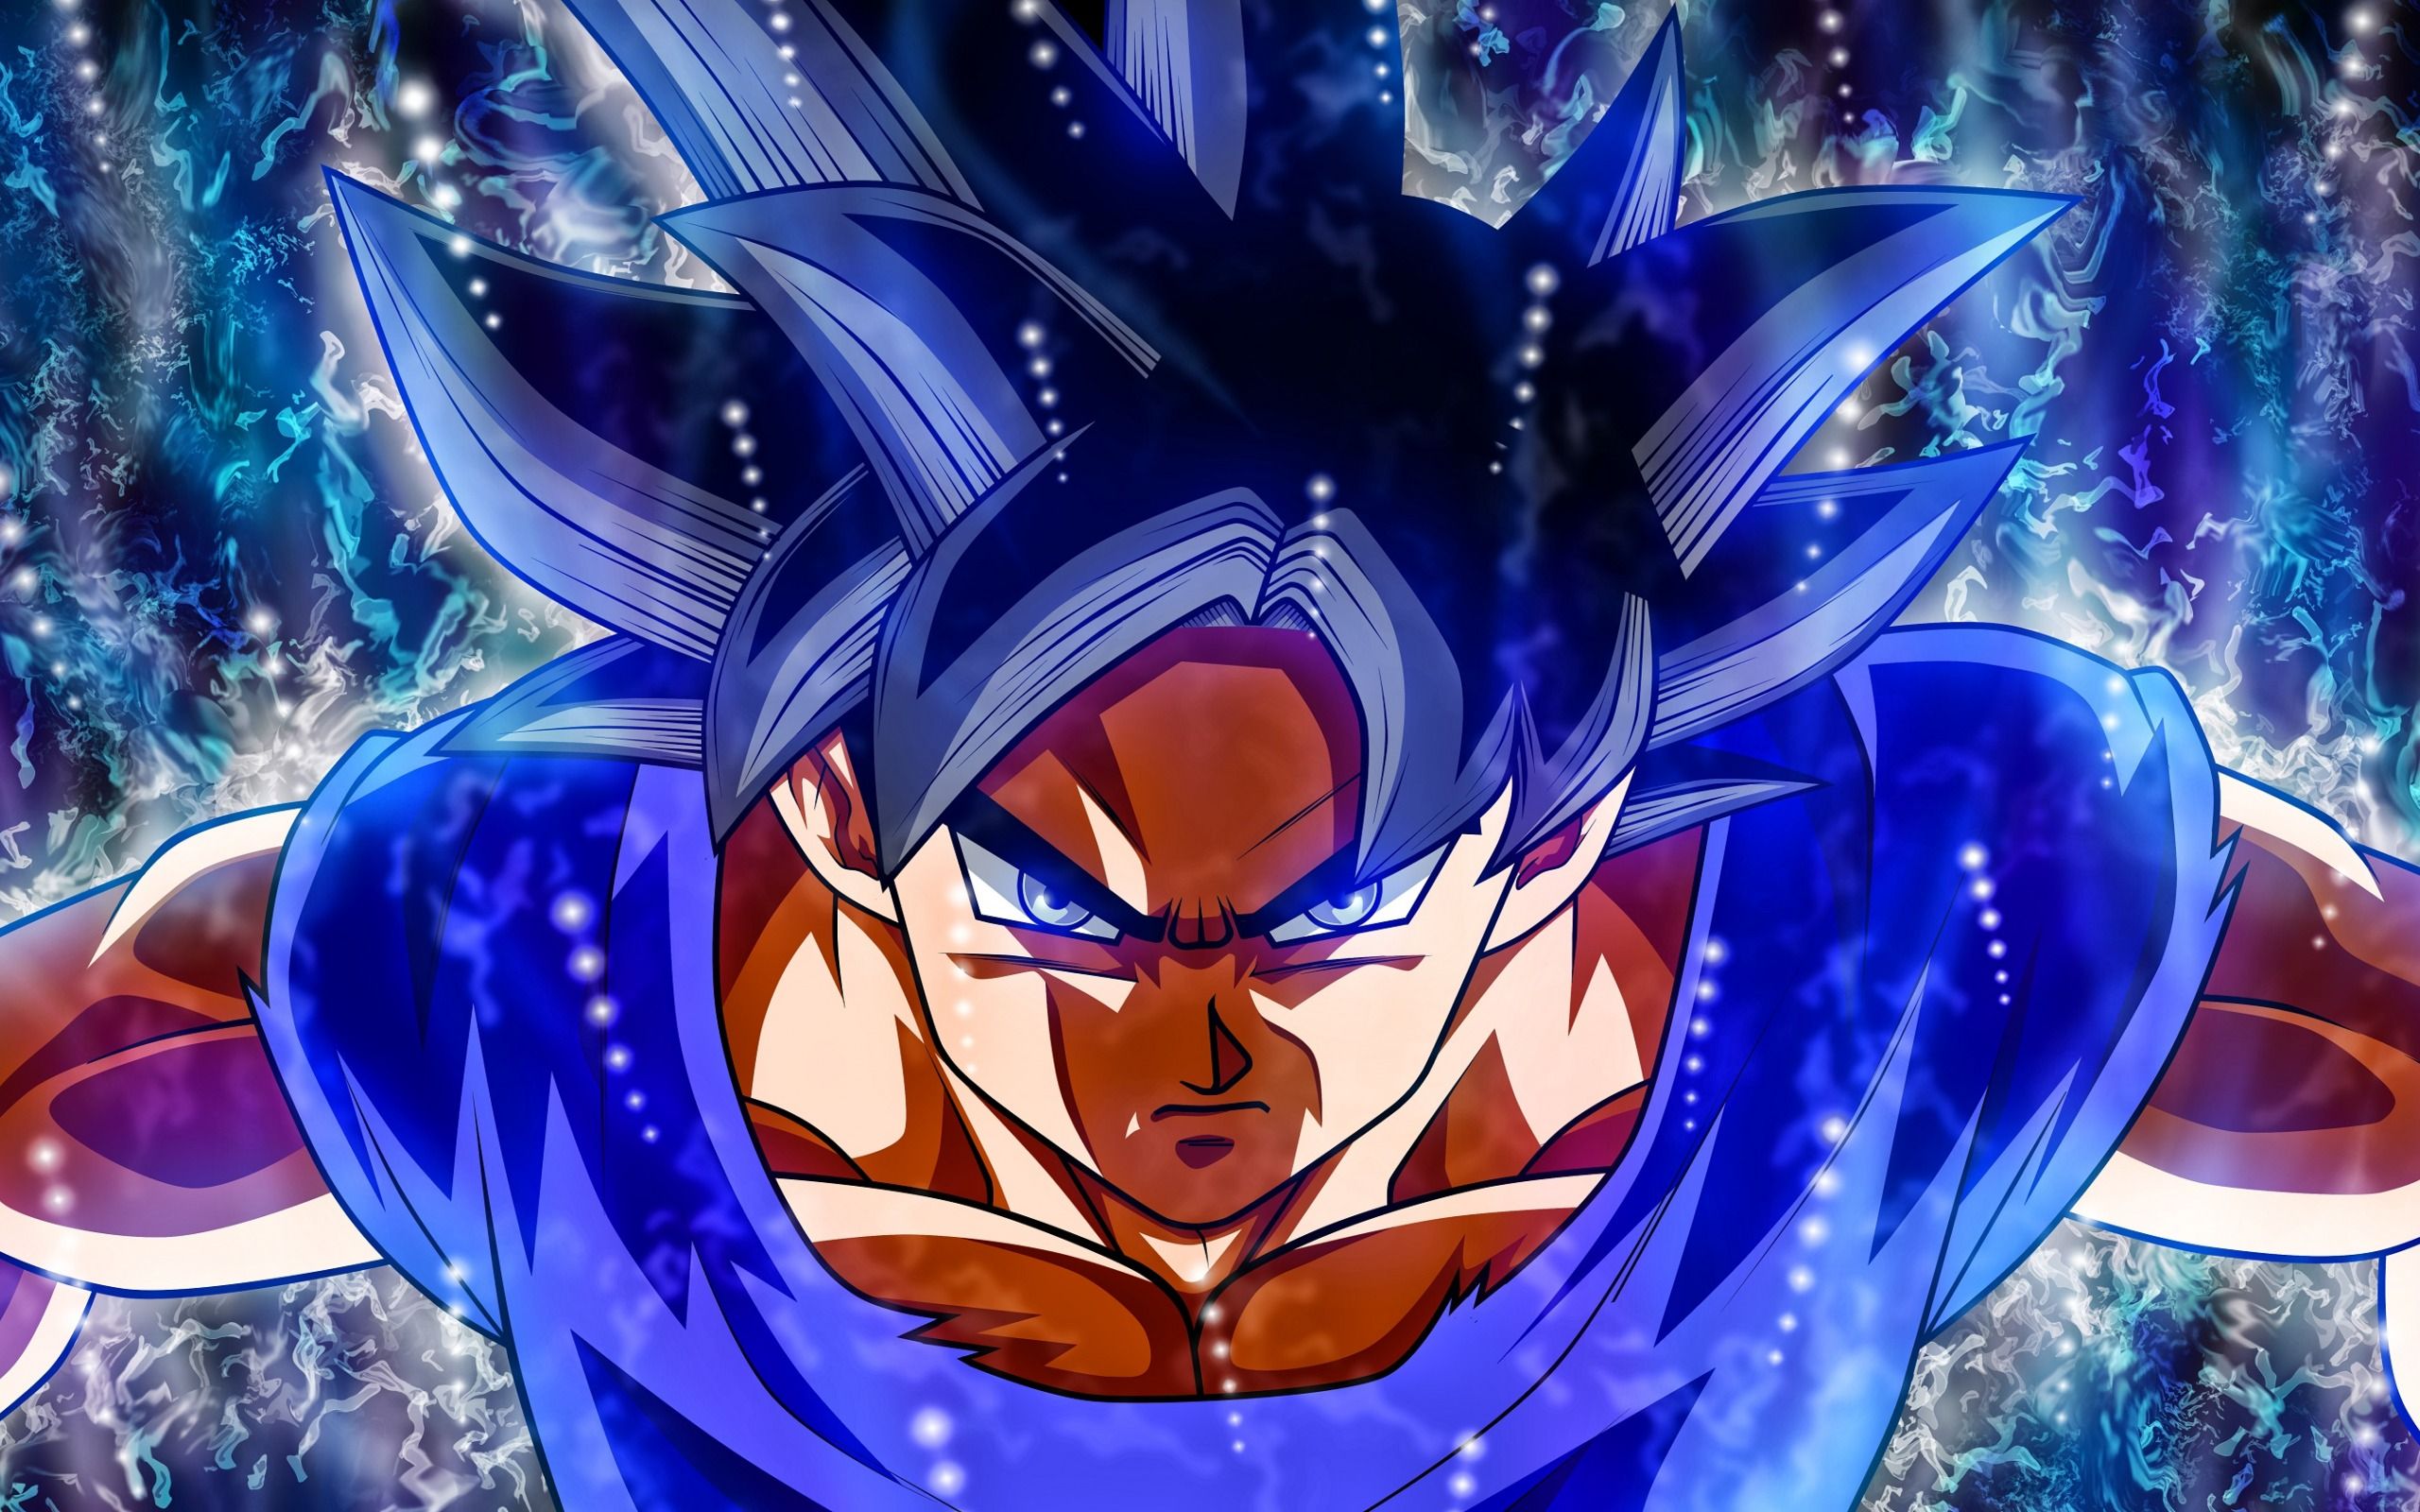 Download wallpaper Dragon Ball, Son Goku, main protagonist, Japanese manga, art for desktop with resolution 2560x1600. High Quality HD picture wallpaper